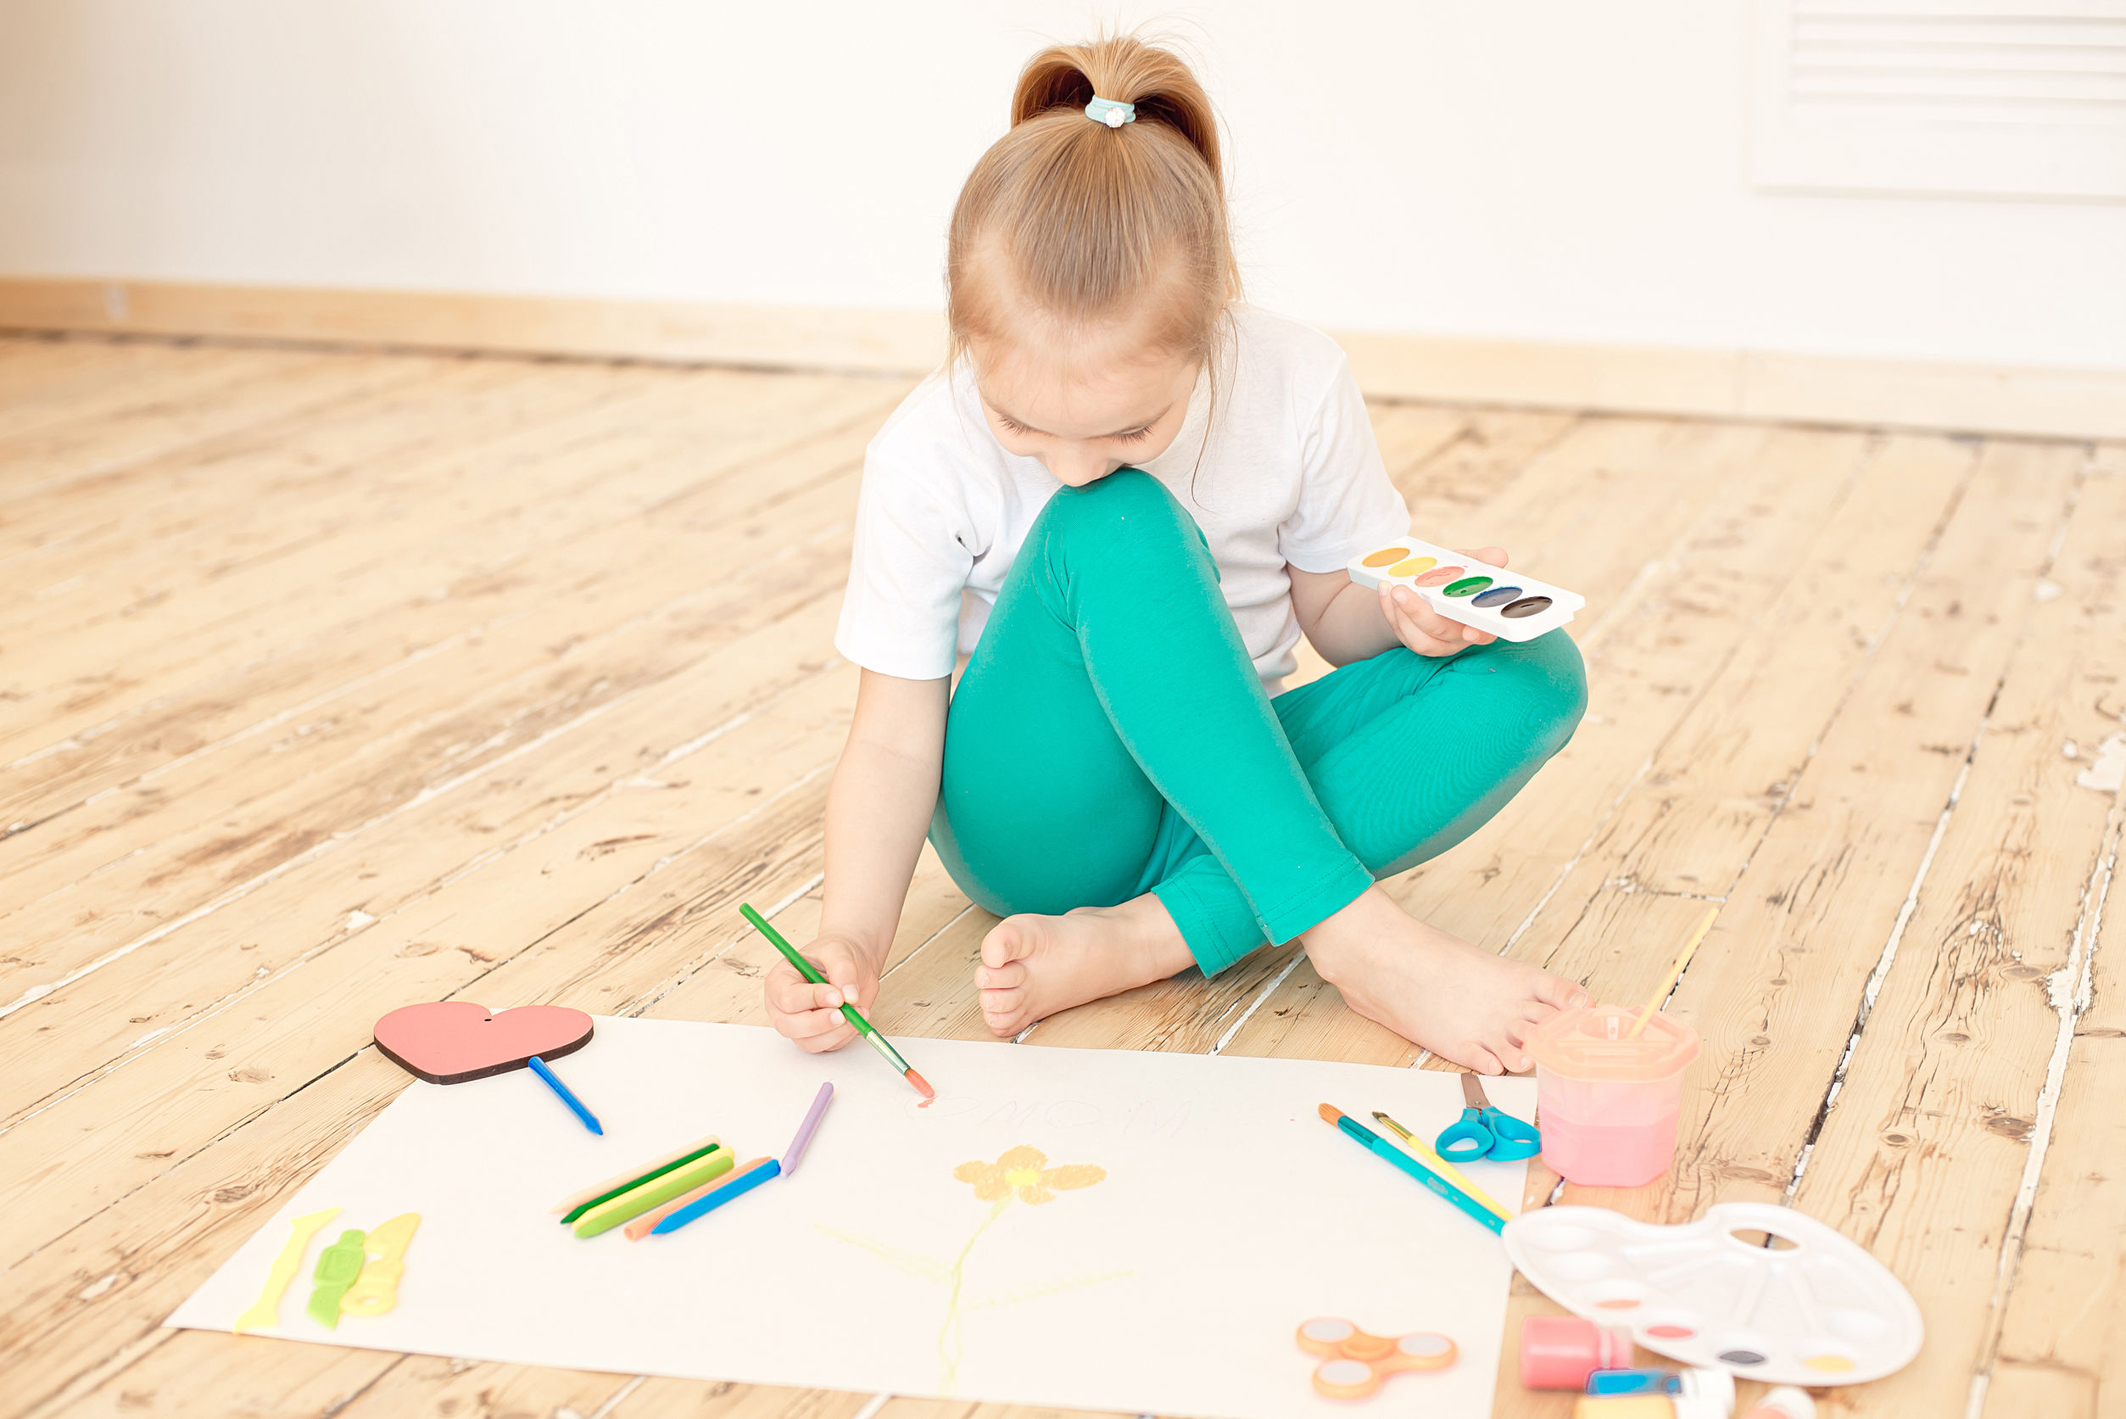 Little blonde girl paints on big white paper sitting on the floor indoors.